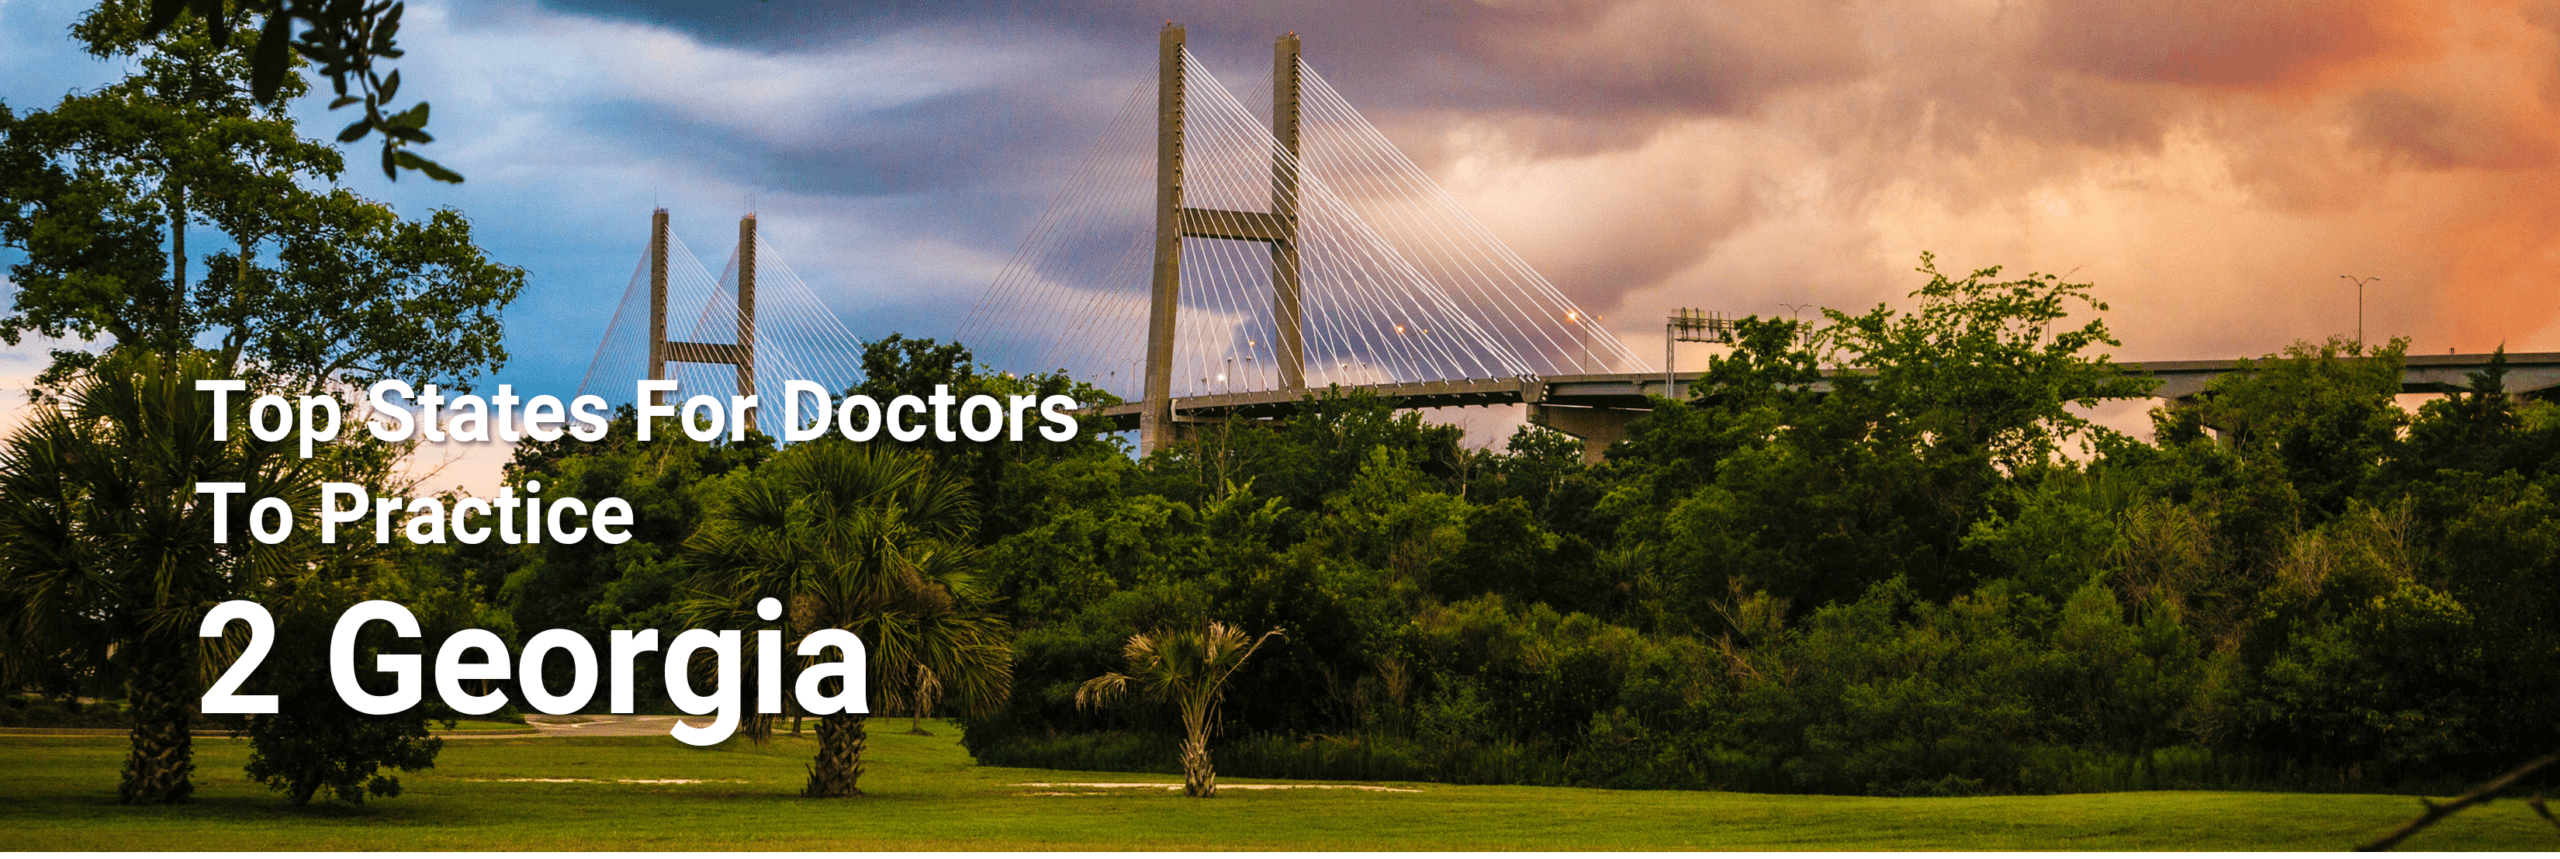 Top States for Doctors to Practice 2 Georgia